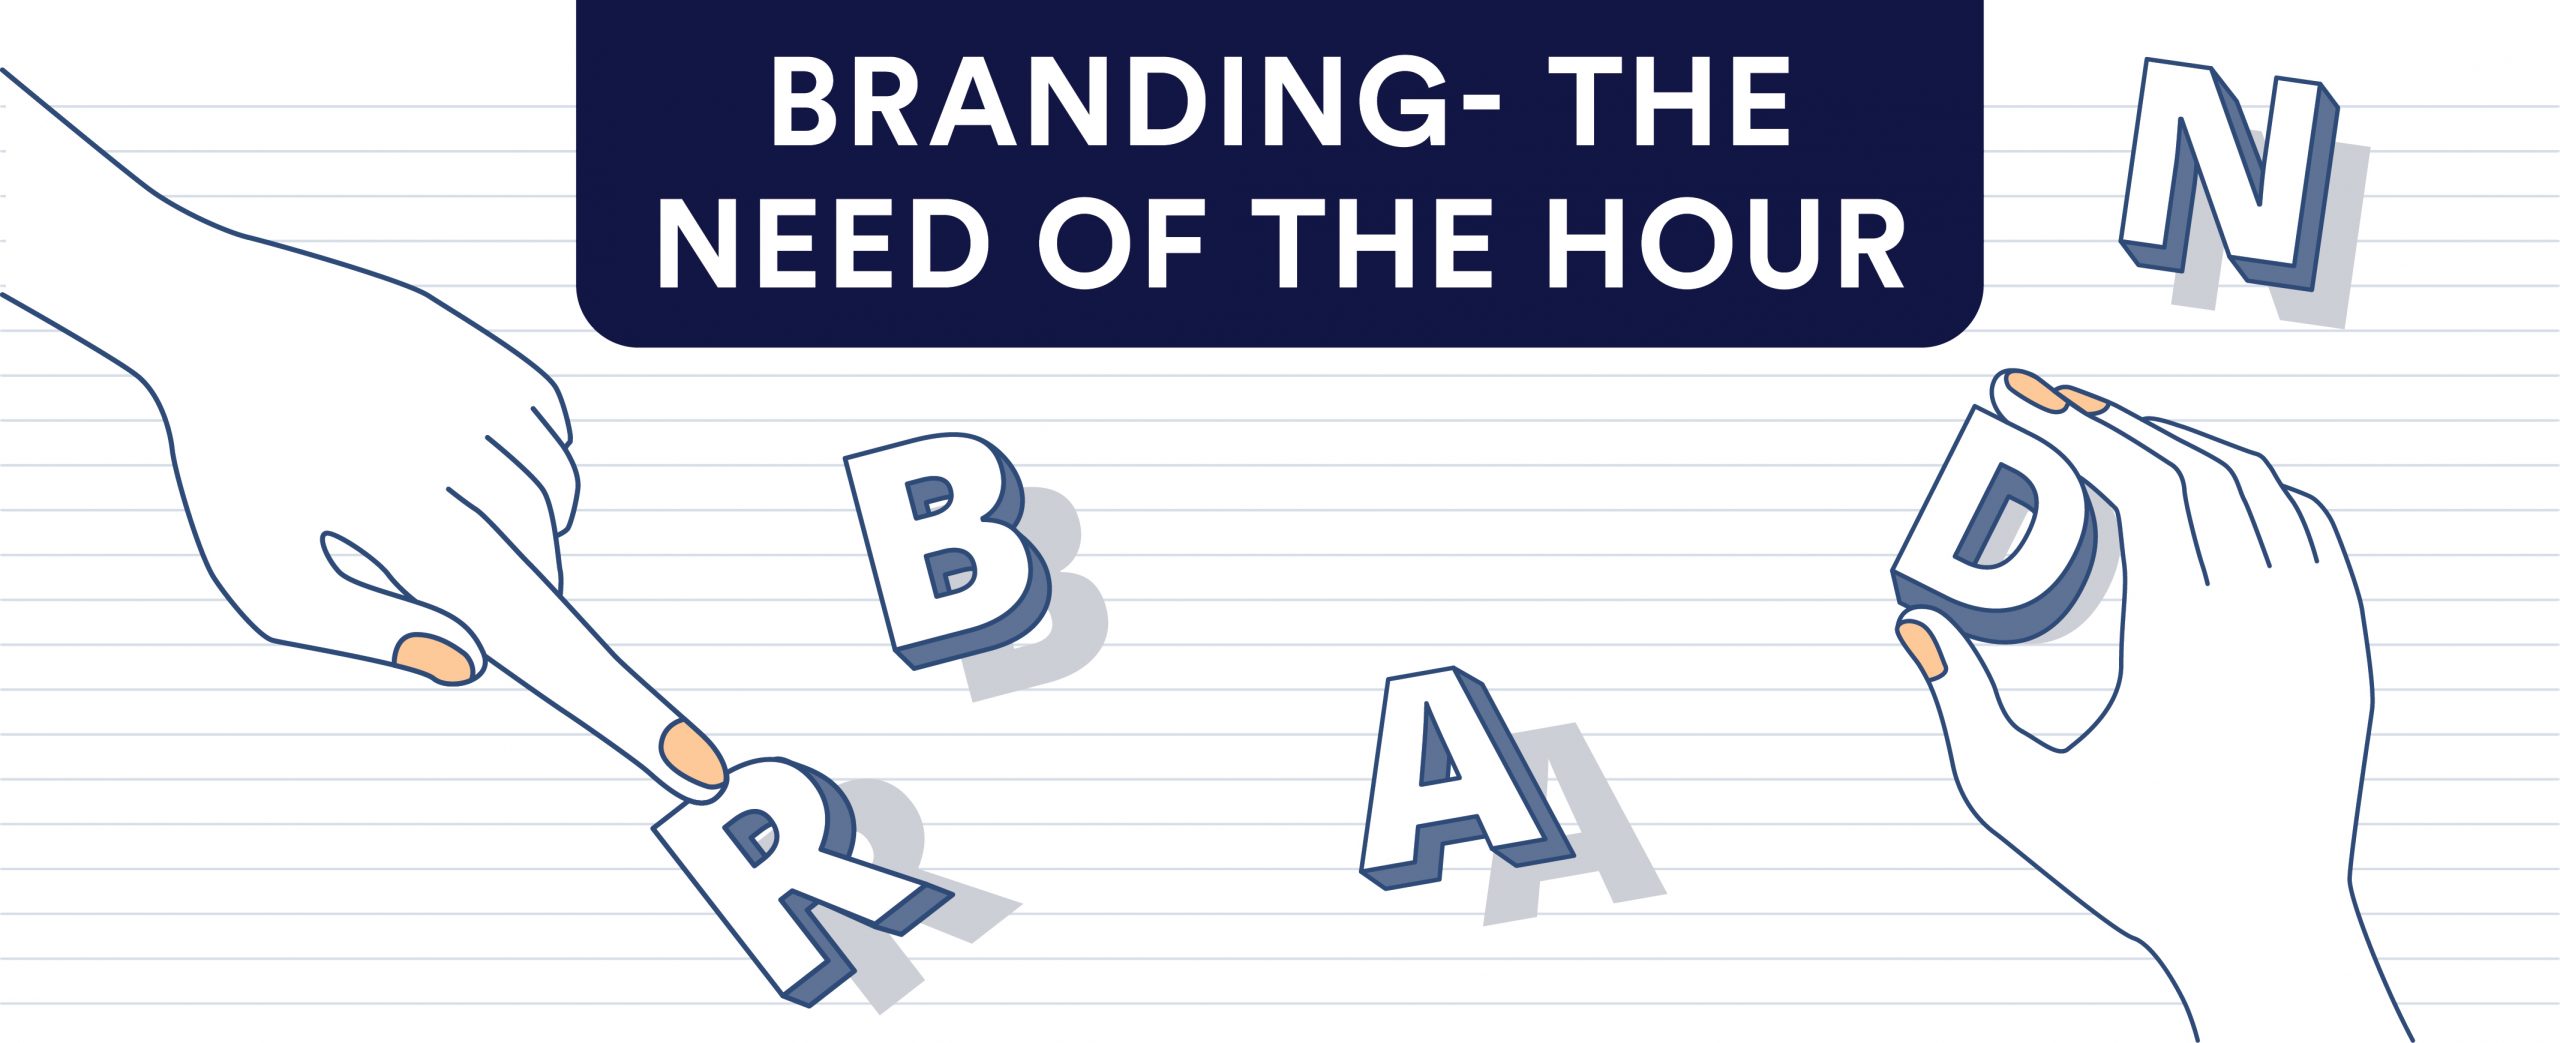 Branding- The need of the hour